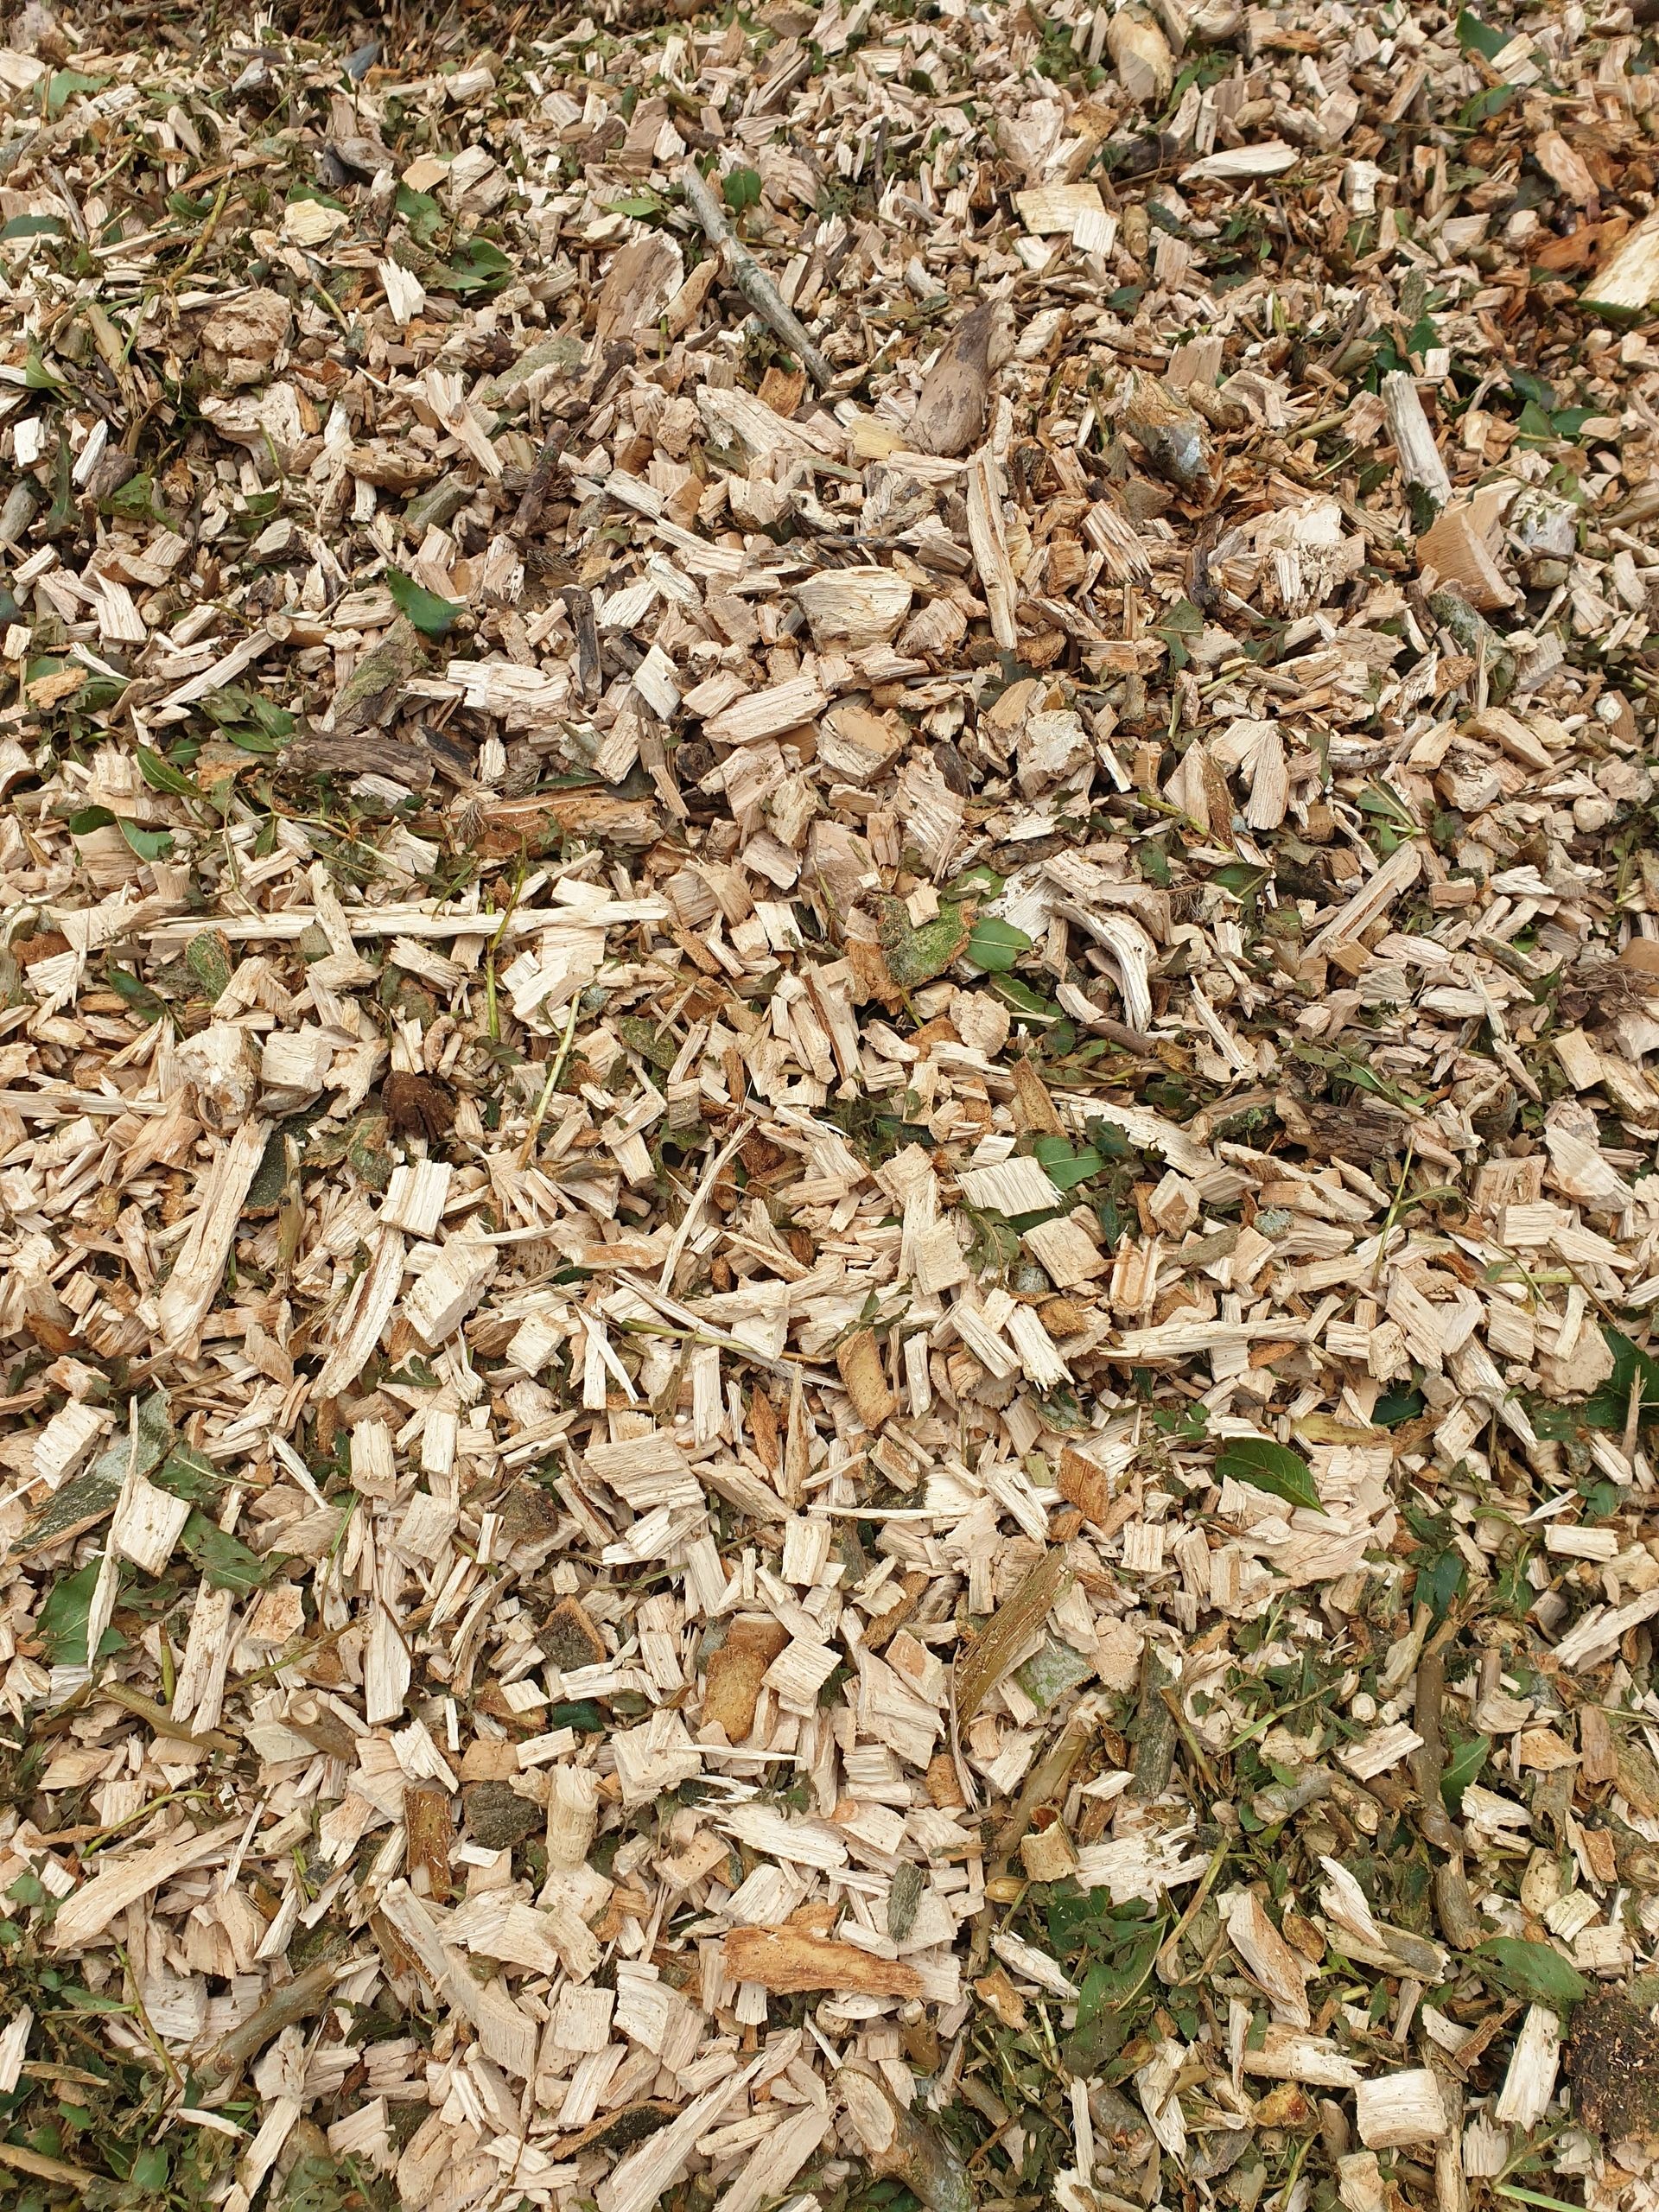 Freshly chipped woodchip mulch, including foliage.